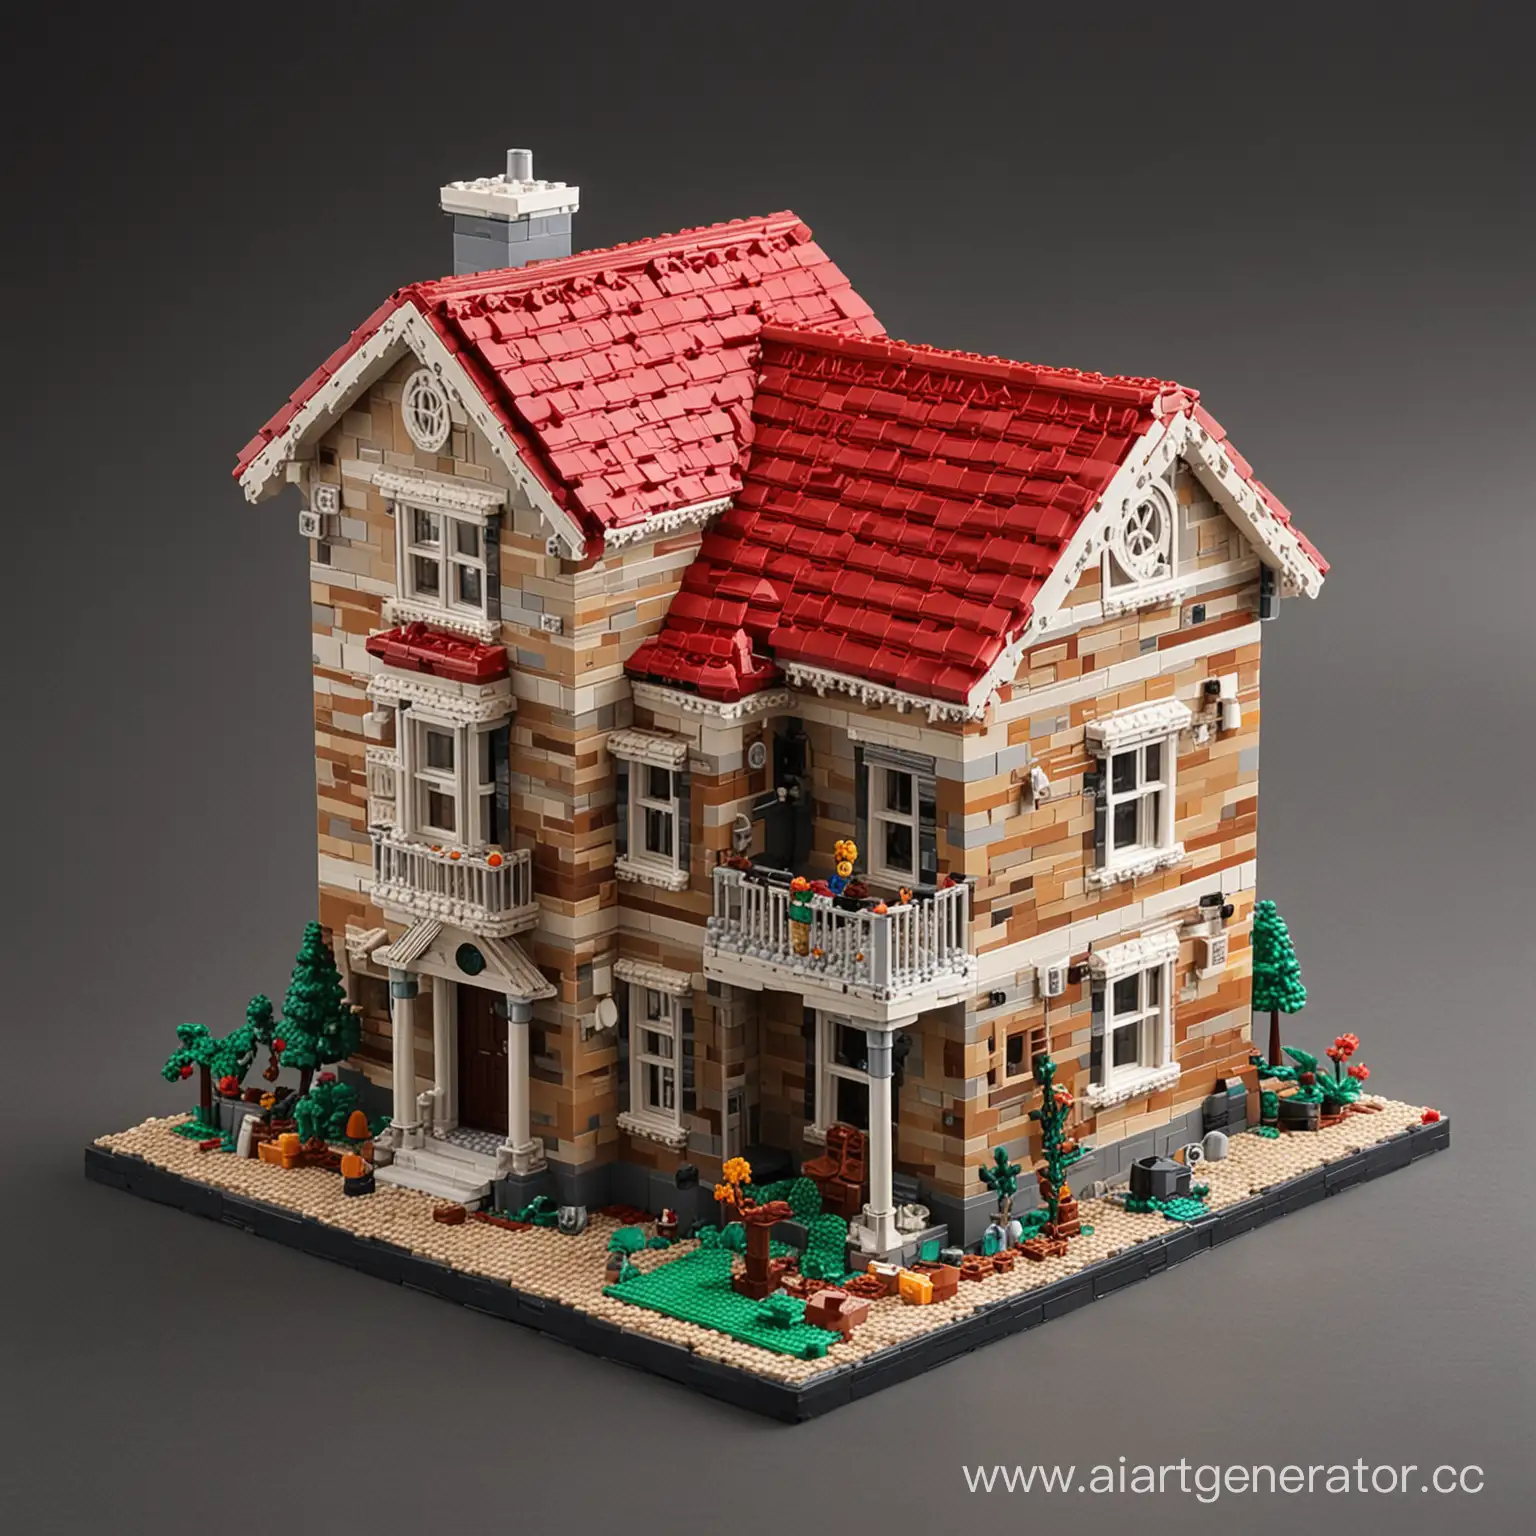 Creative-Family-Bonding-with-Colorful-Lego-House-Building